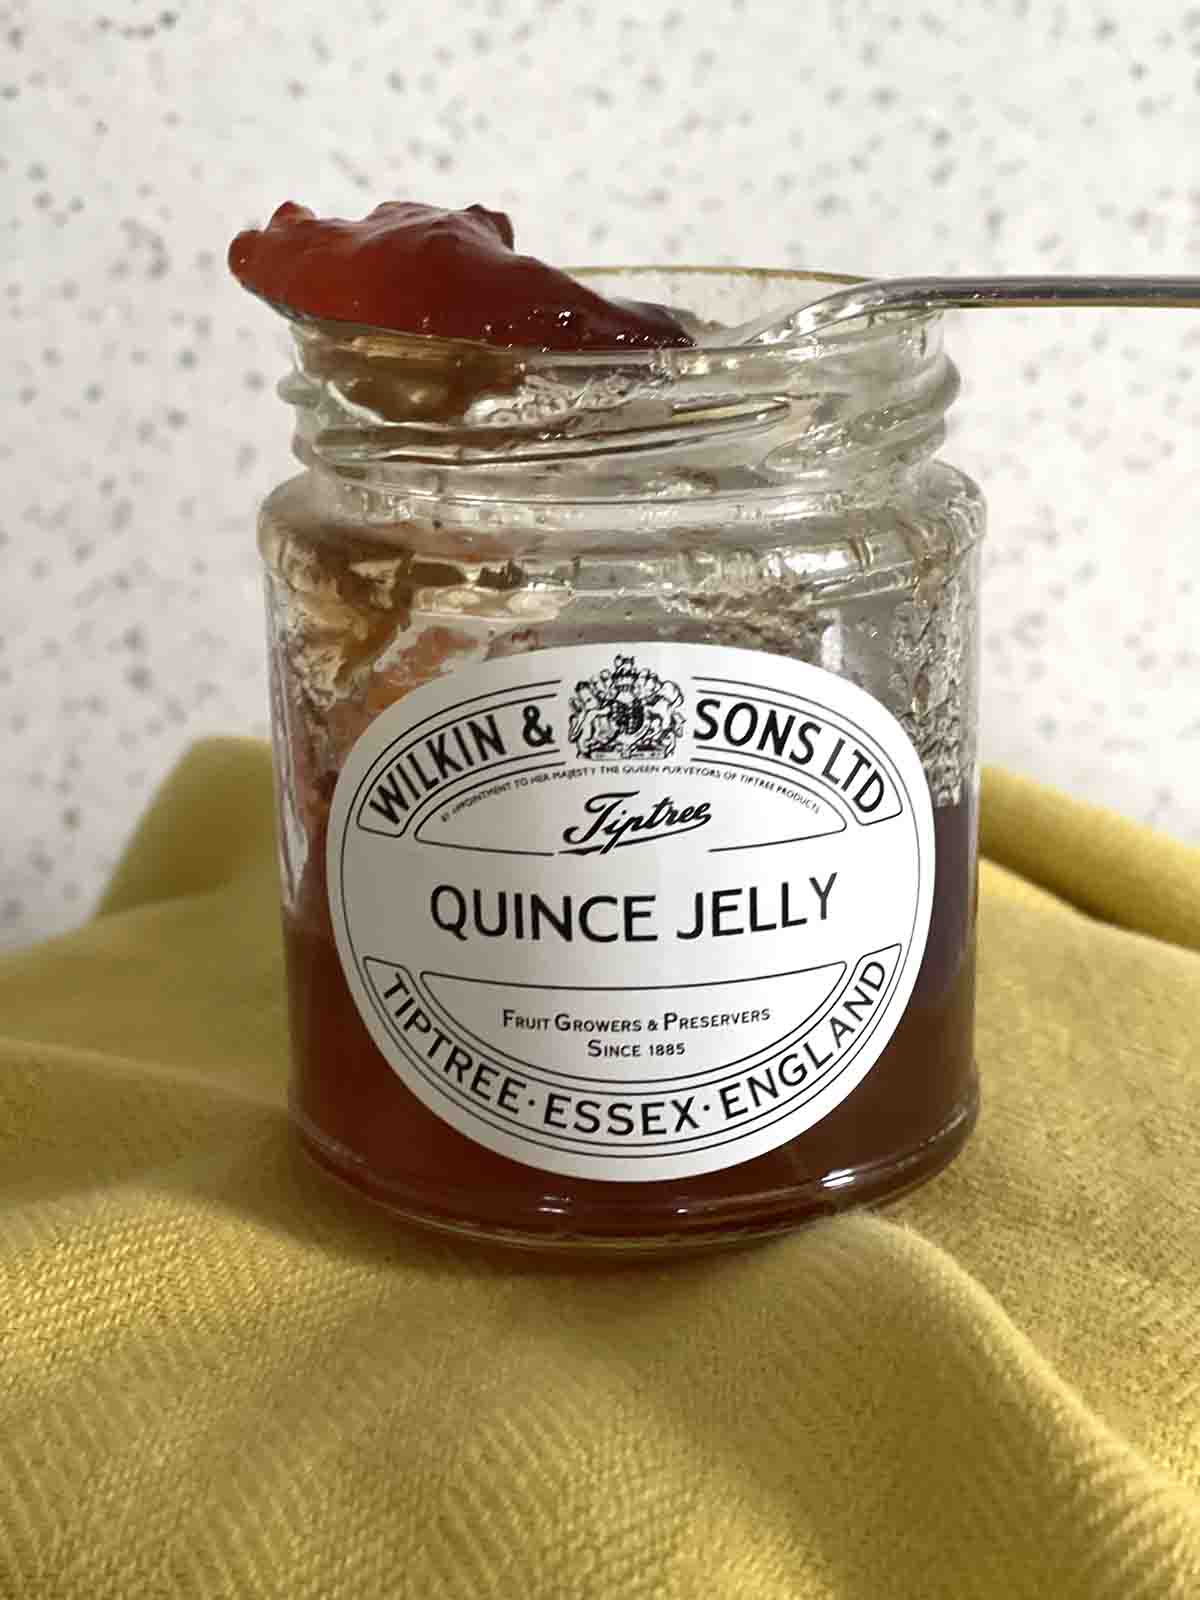 quince jelly in a jar.